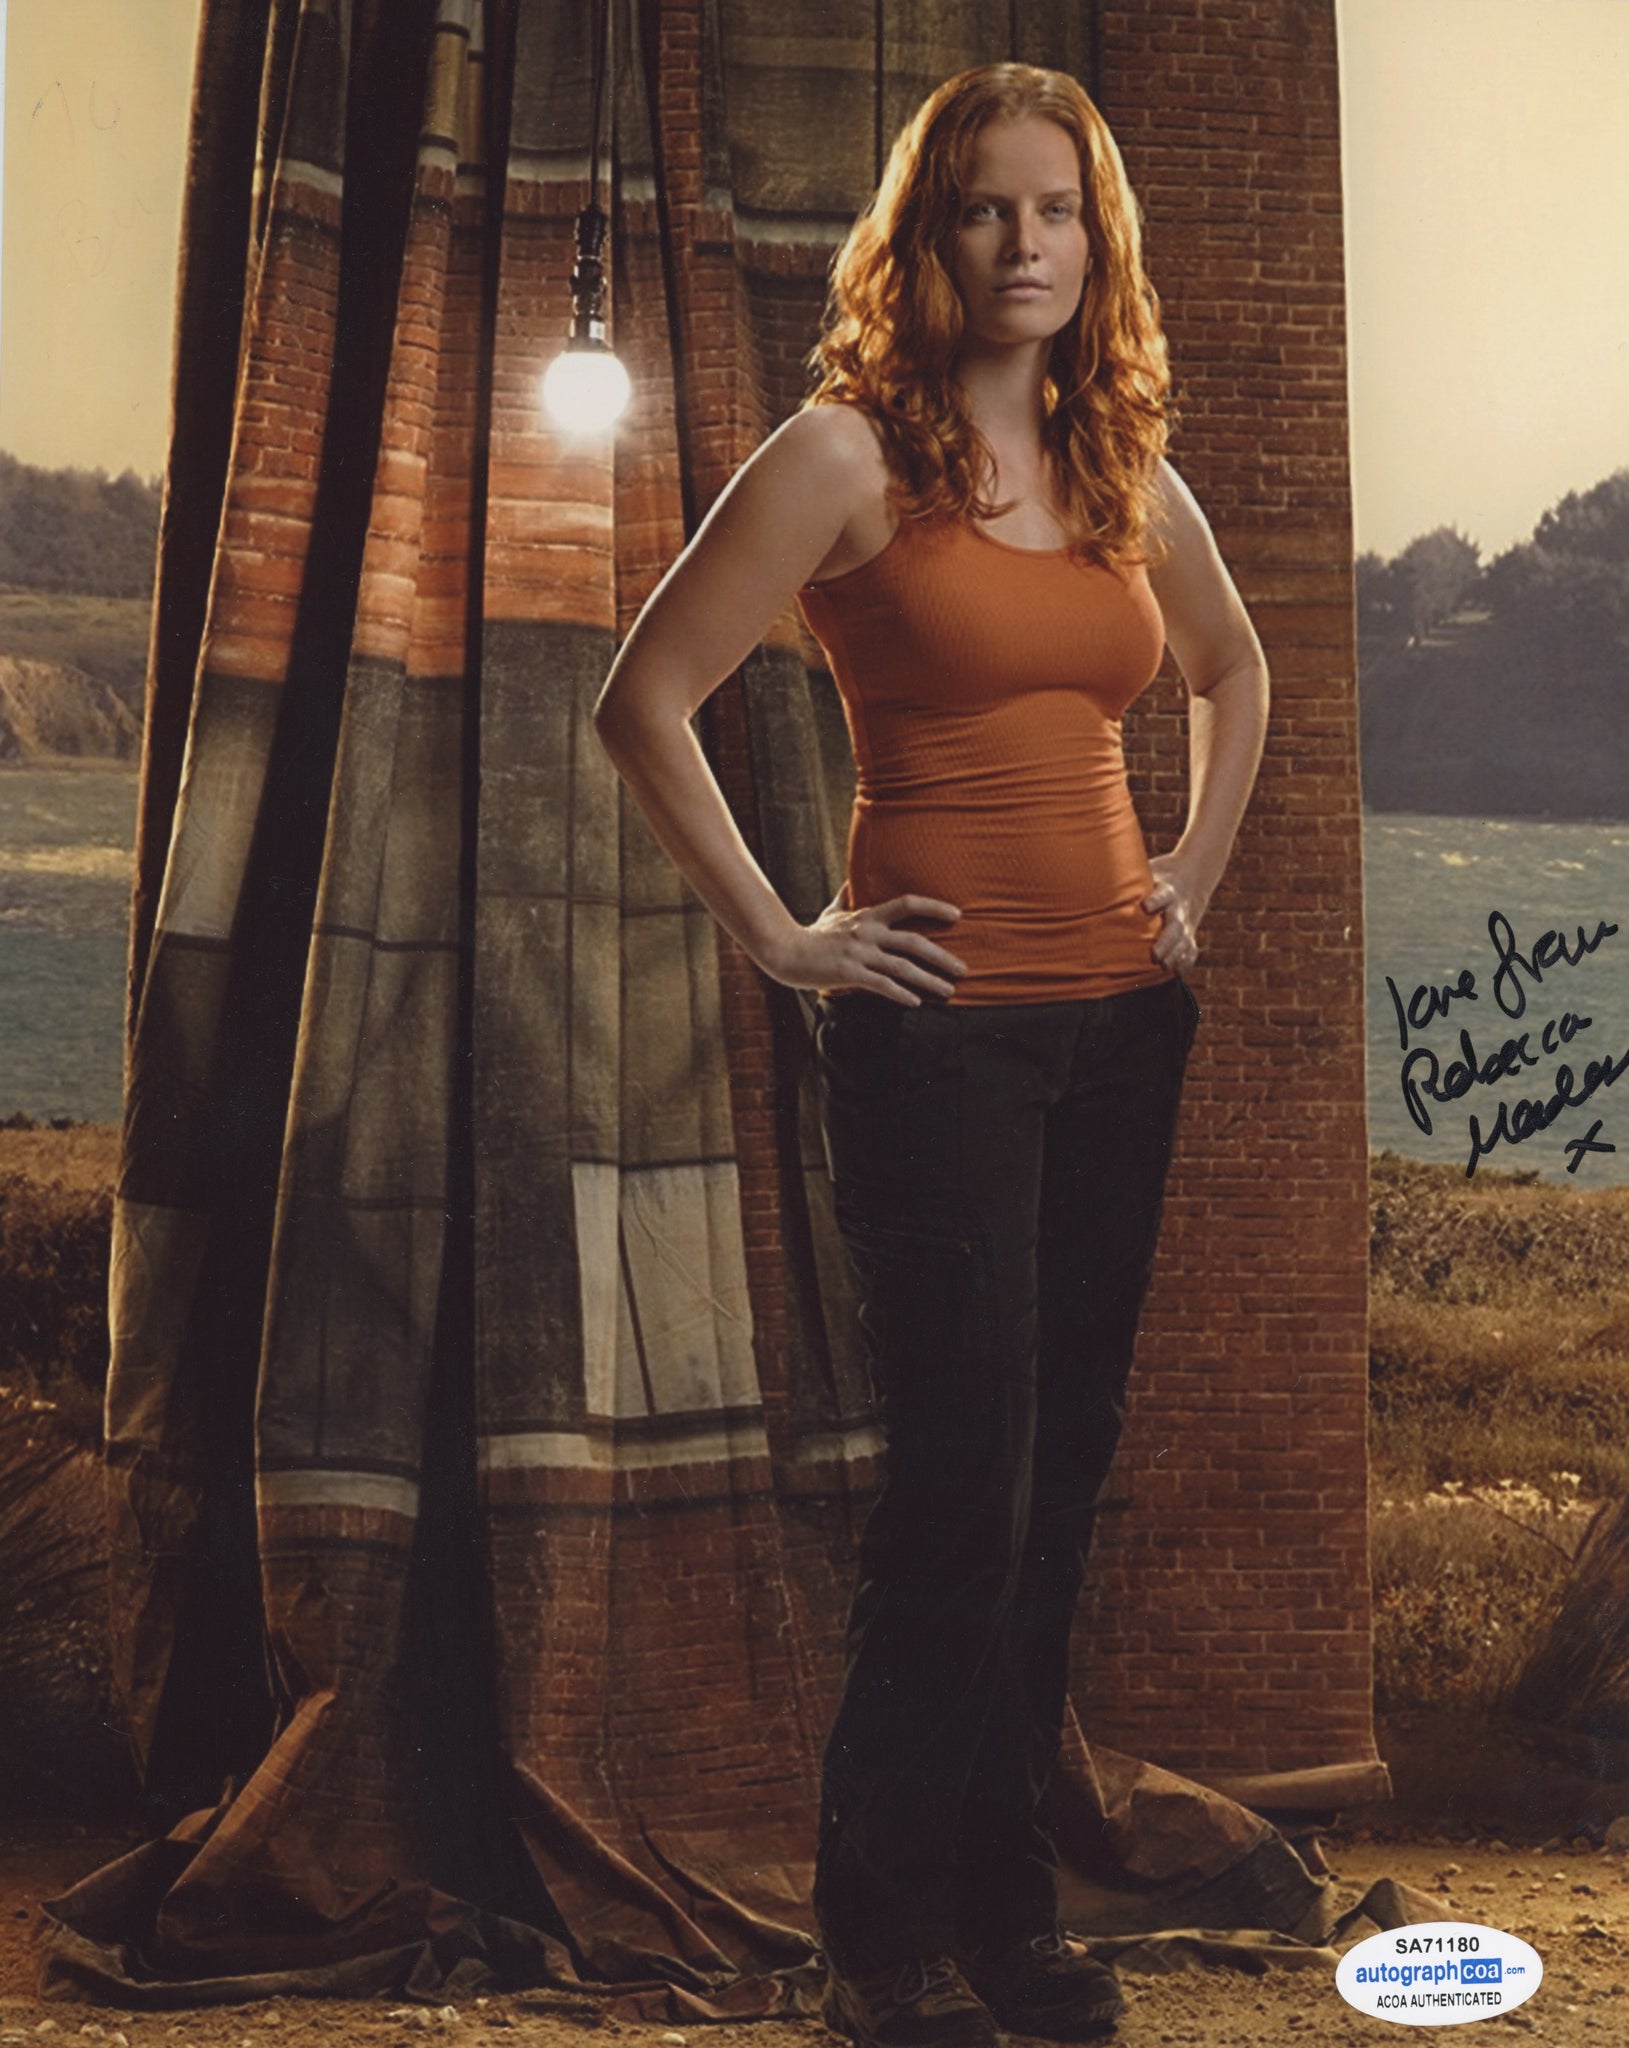 Rebecca Mader Lost Signed Autograph 8x10 Photo ACOA